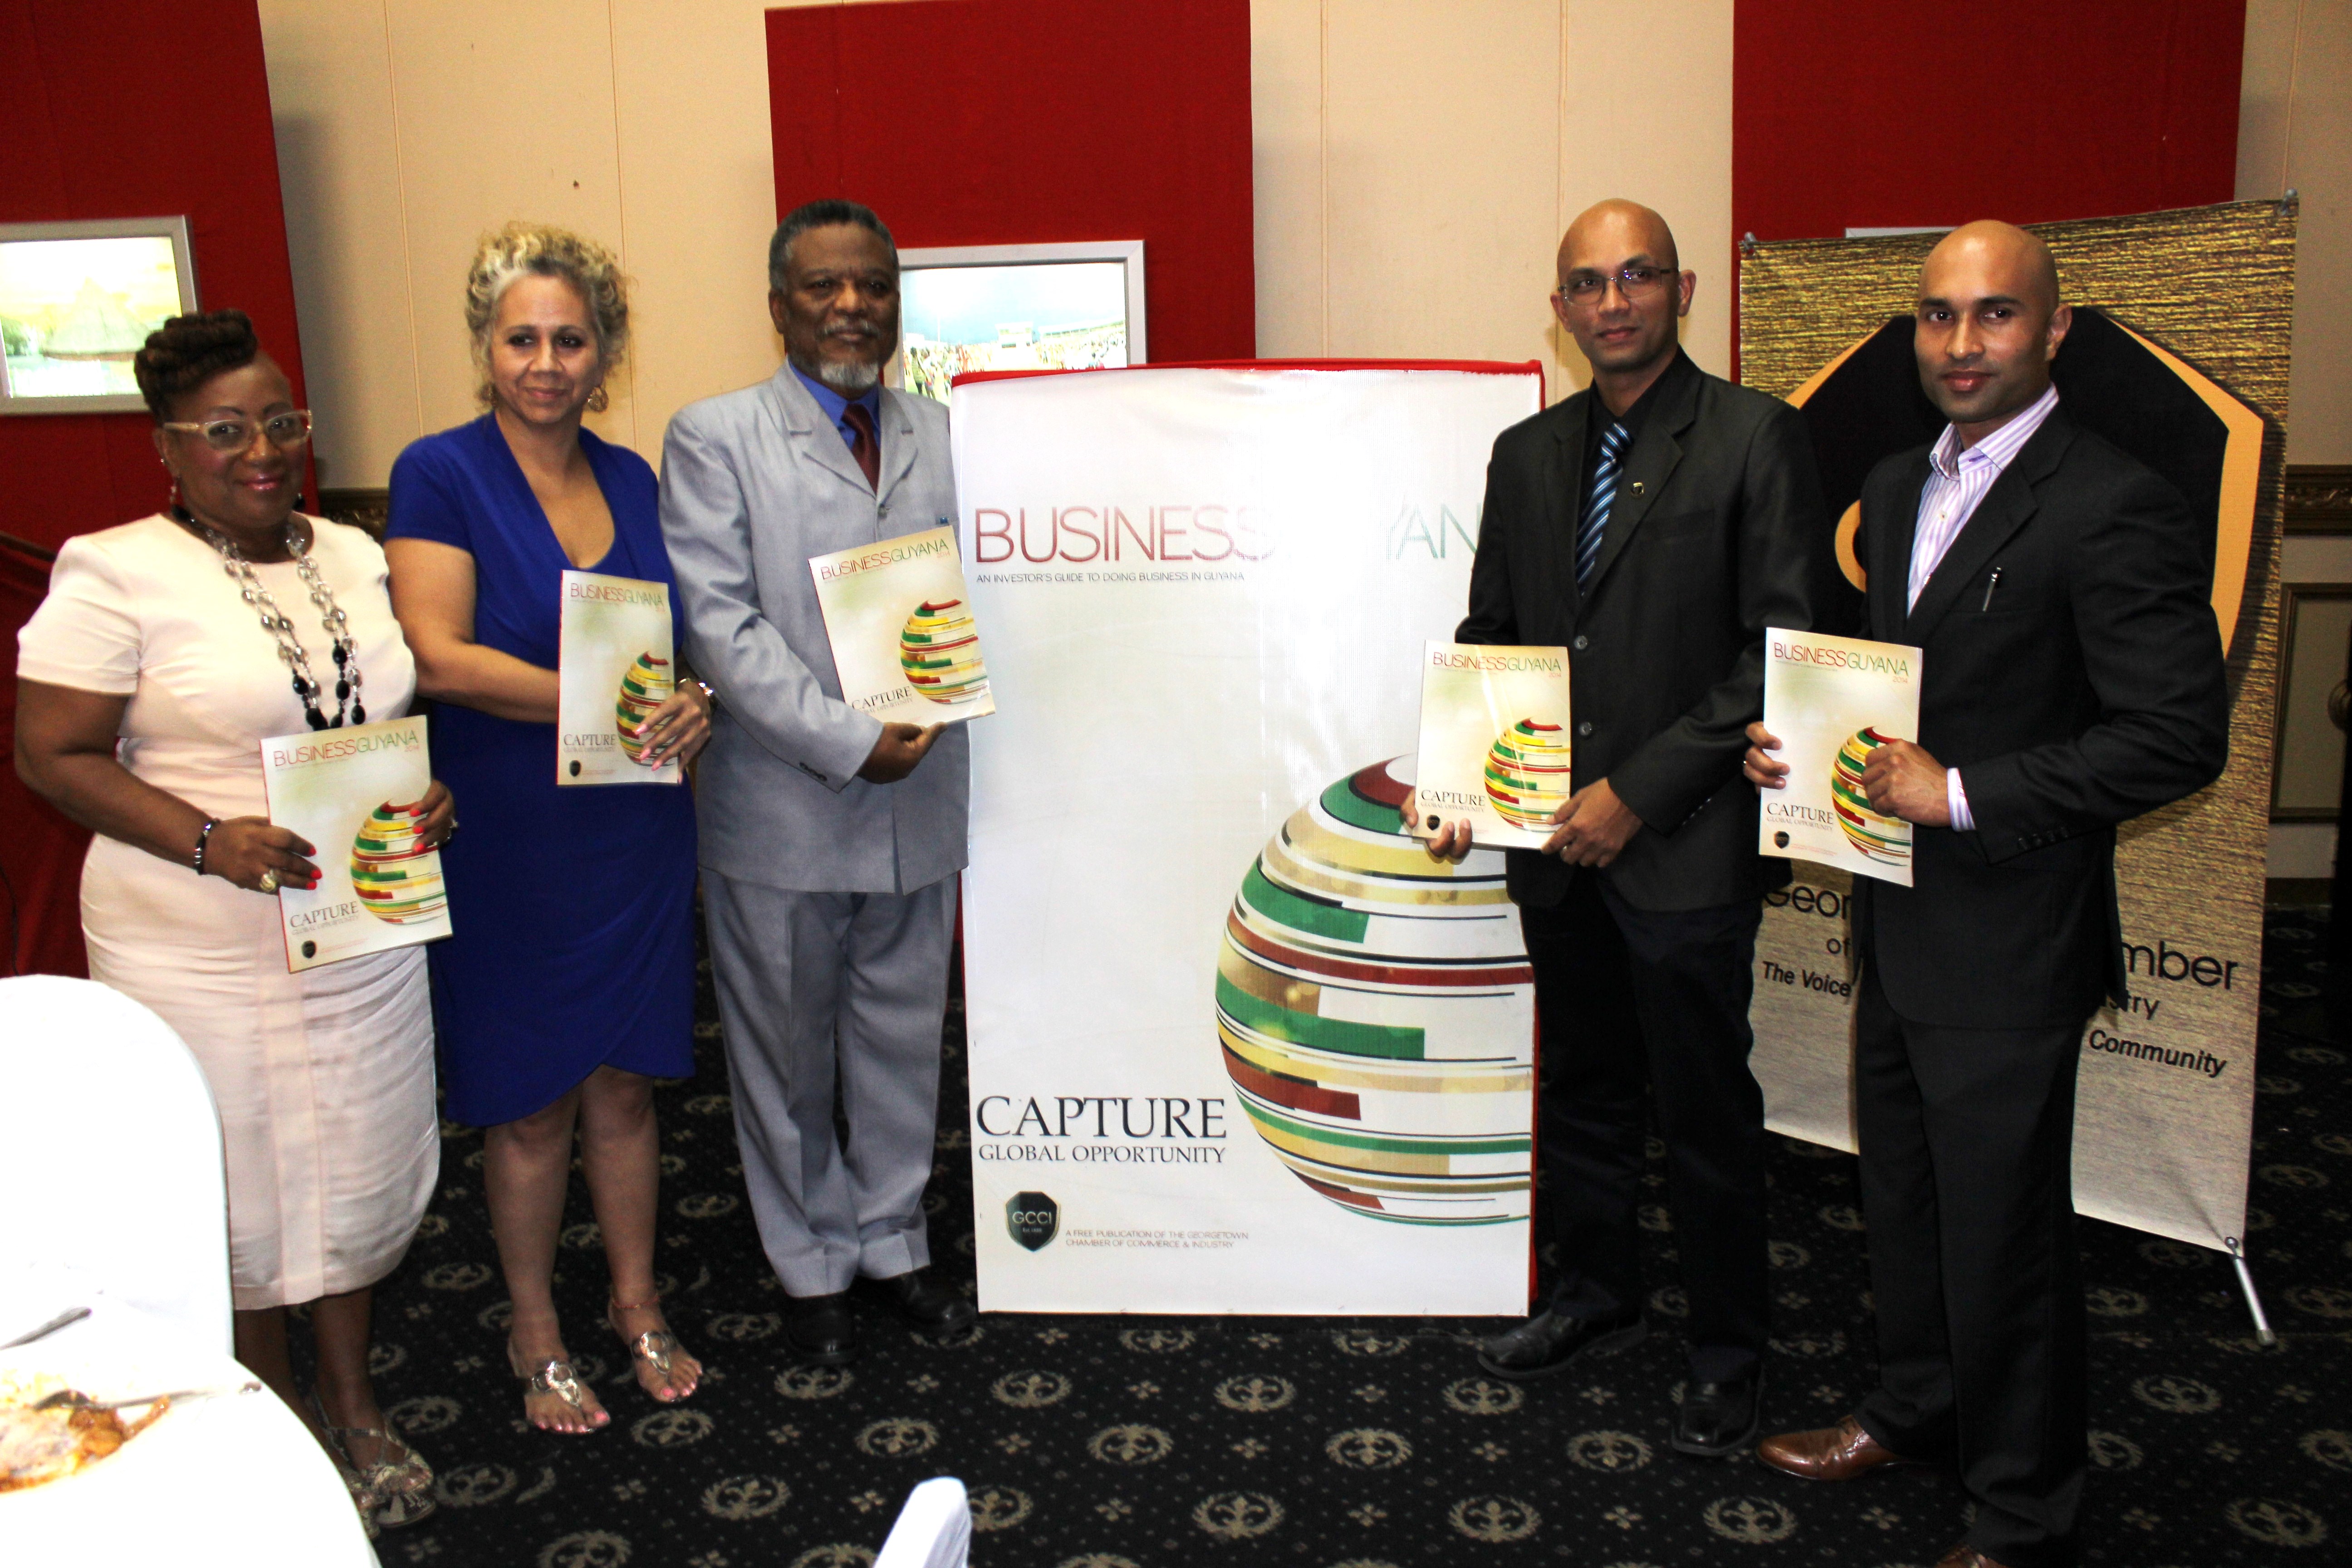 Dinner & Launching of the Chamber’s 5th Edition of the Business Guyana Magazine